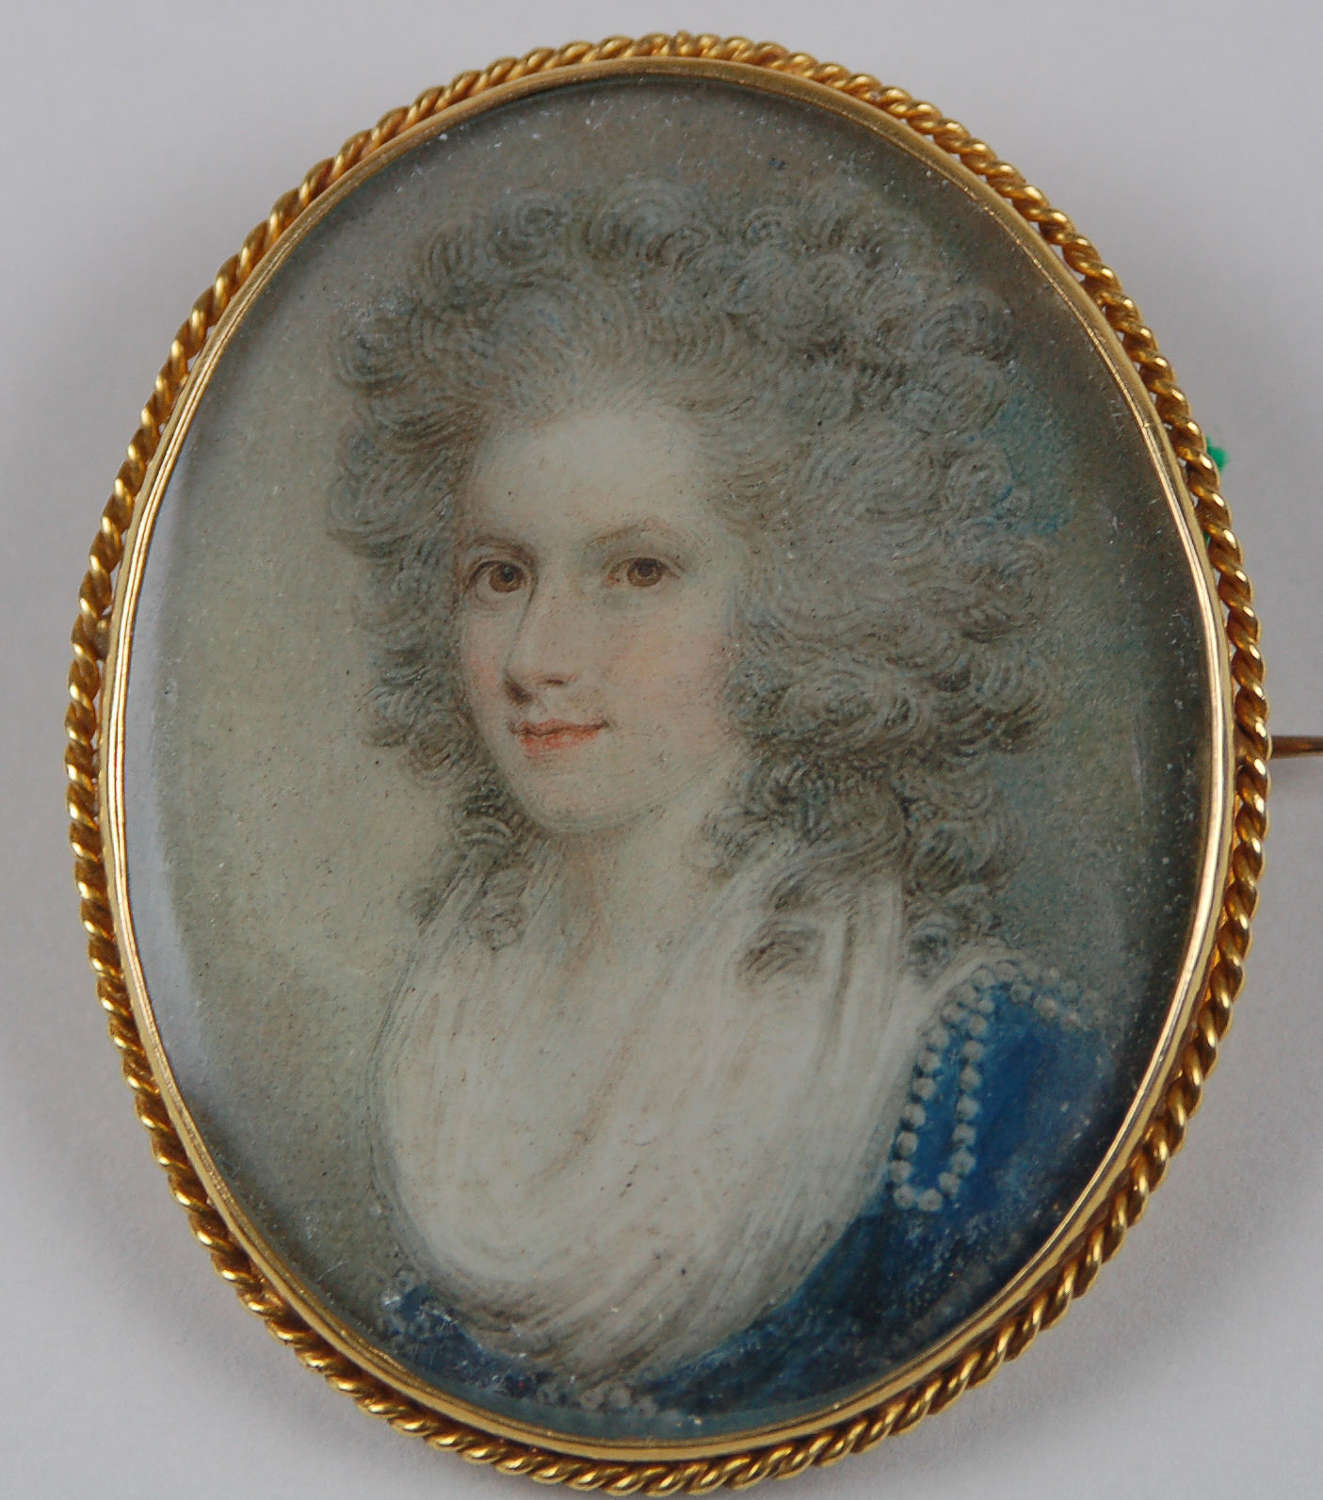 Miniature of lady by Shelley C1800